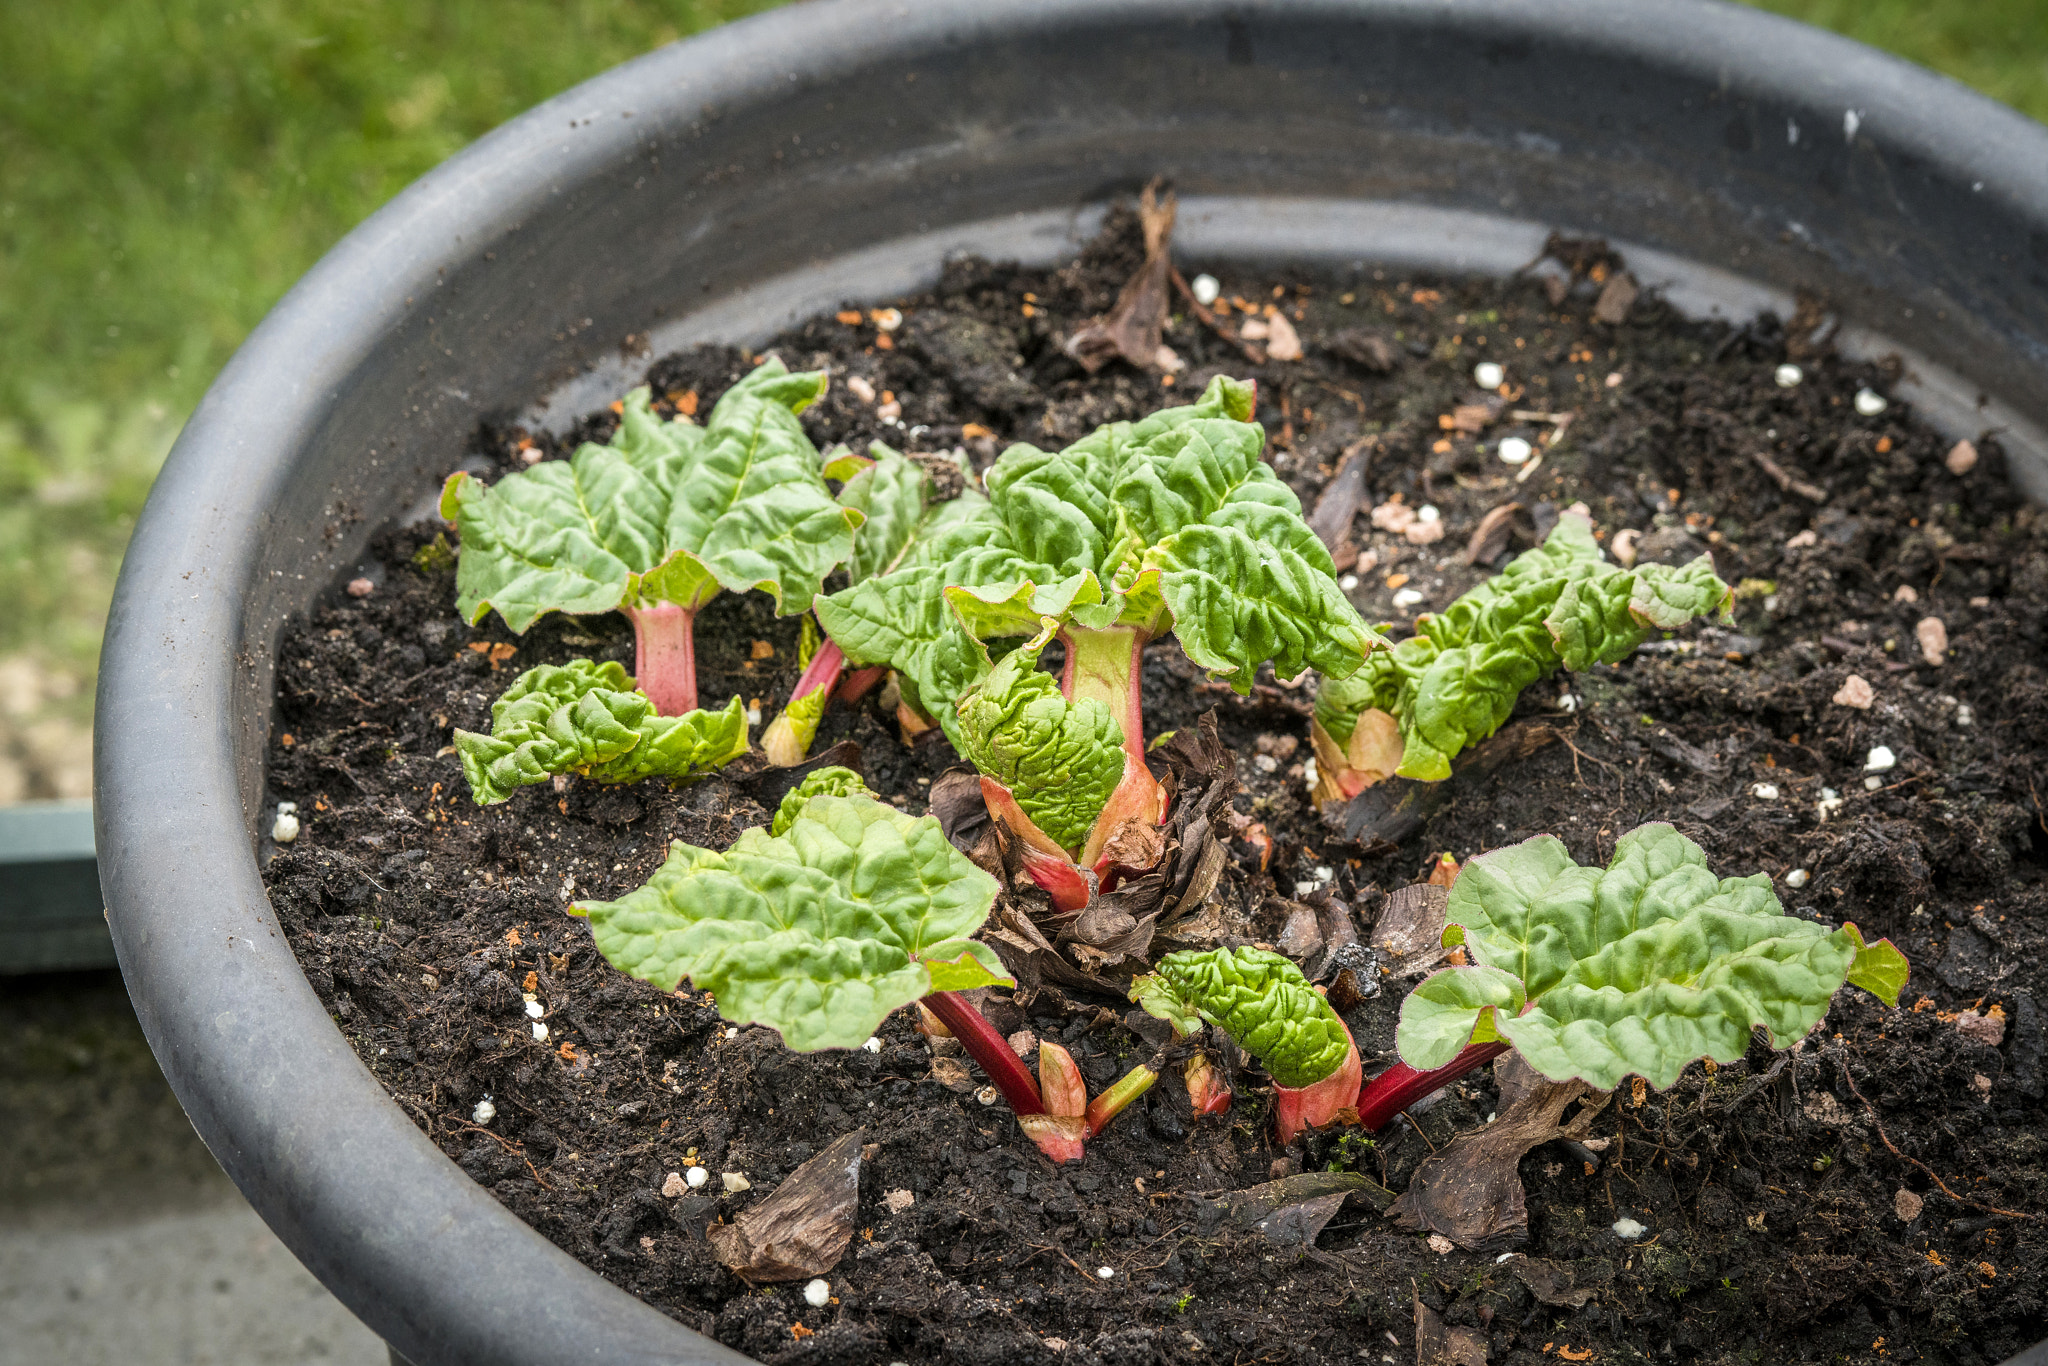 Sony a99 II sample photo. Rhubarb plant in the early stage photography